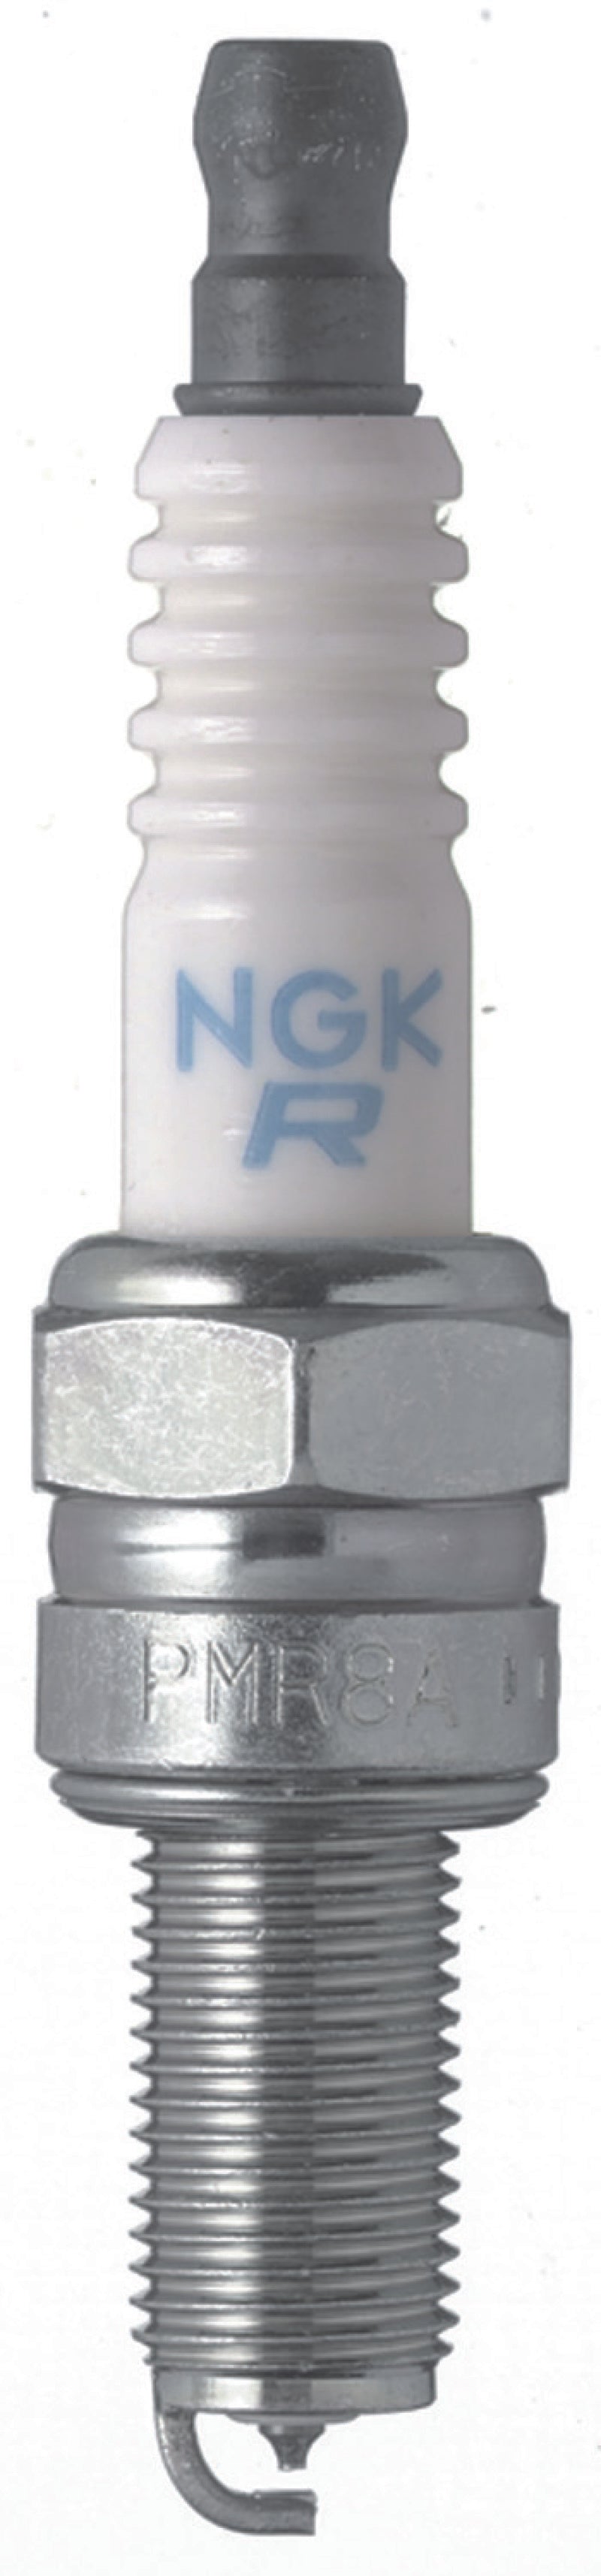 NGK Standard Spark Plug Box of 4 (CR8EB) -  Shop now at Performance Car Parts